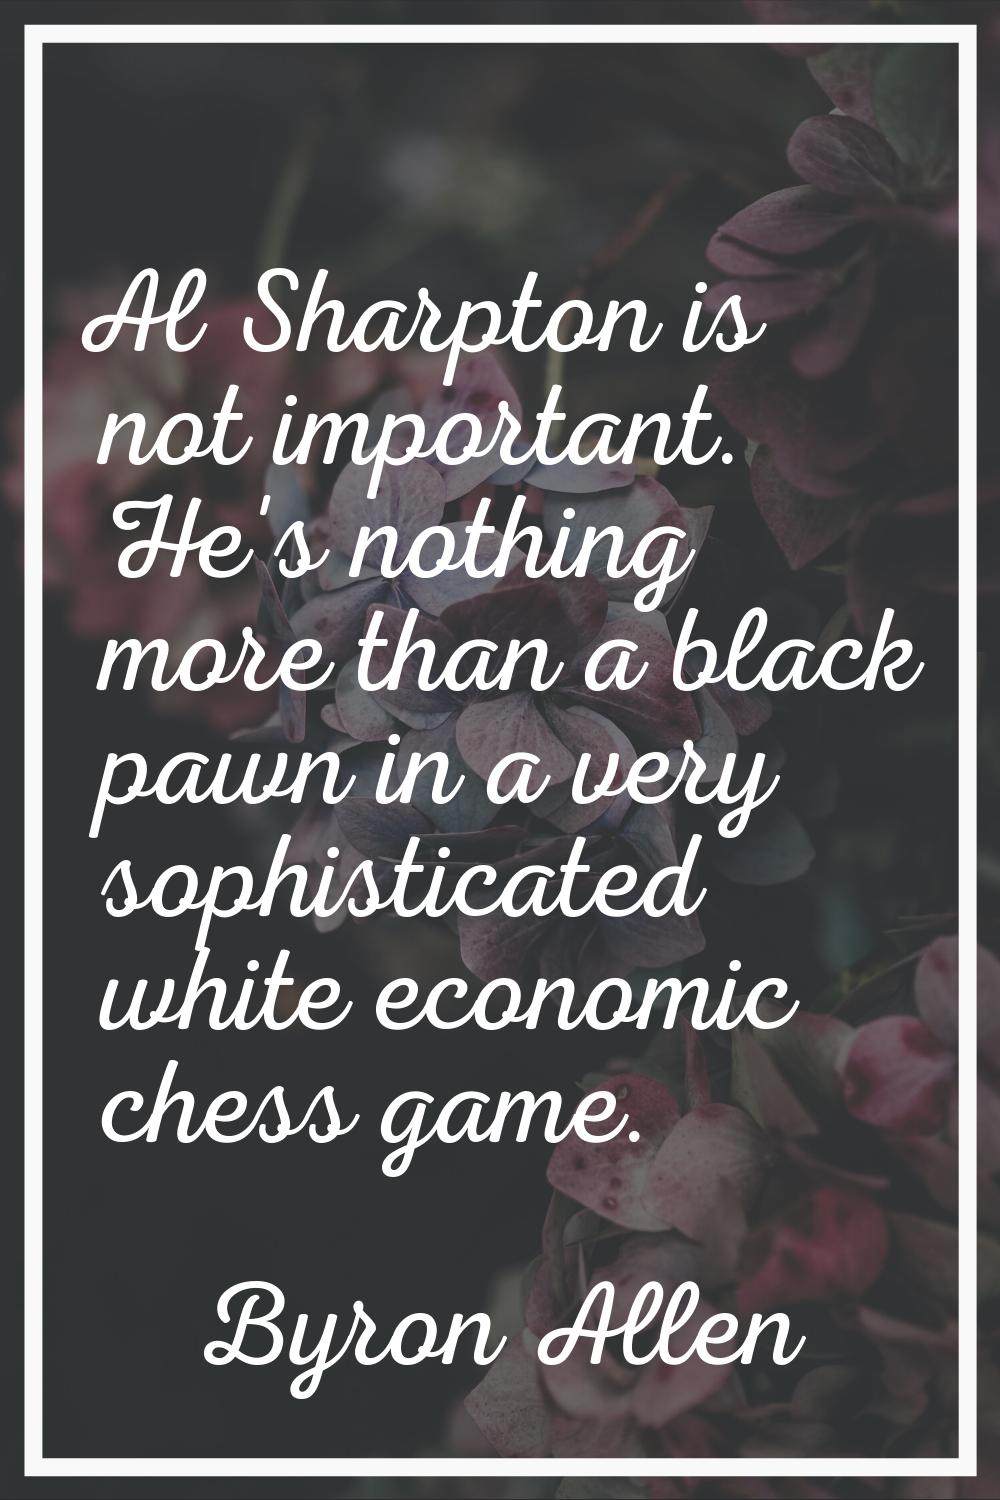 Al Sharpton is not important. He's nothing more than a black pawn in a very sophisticated white eco